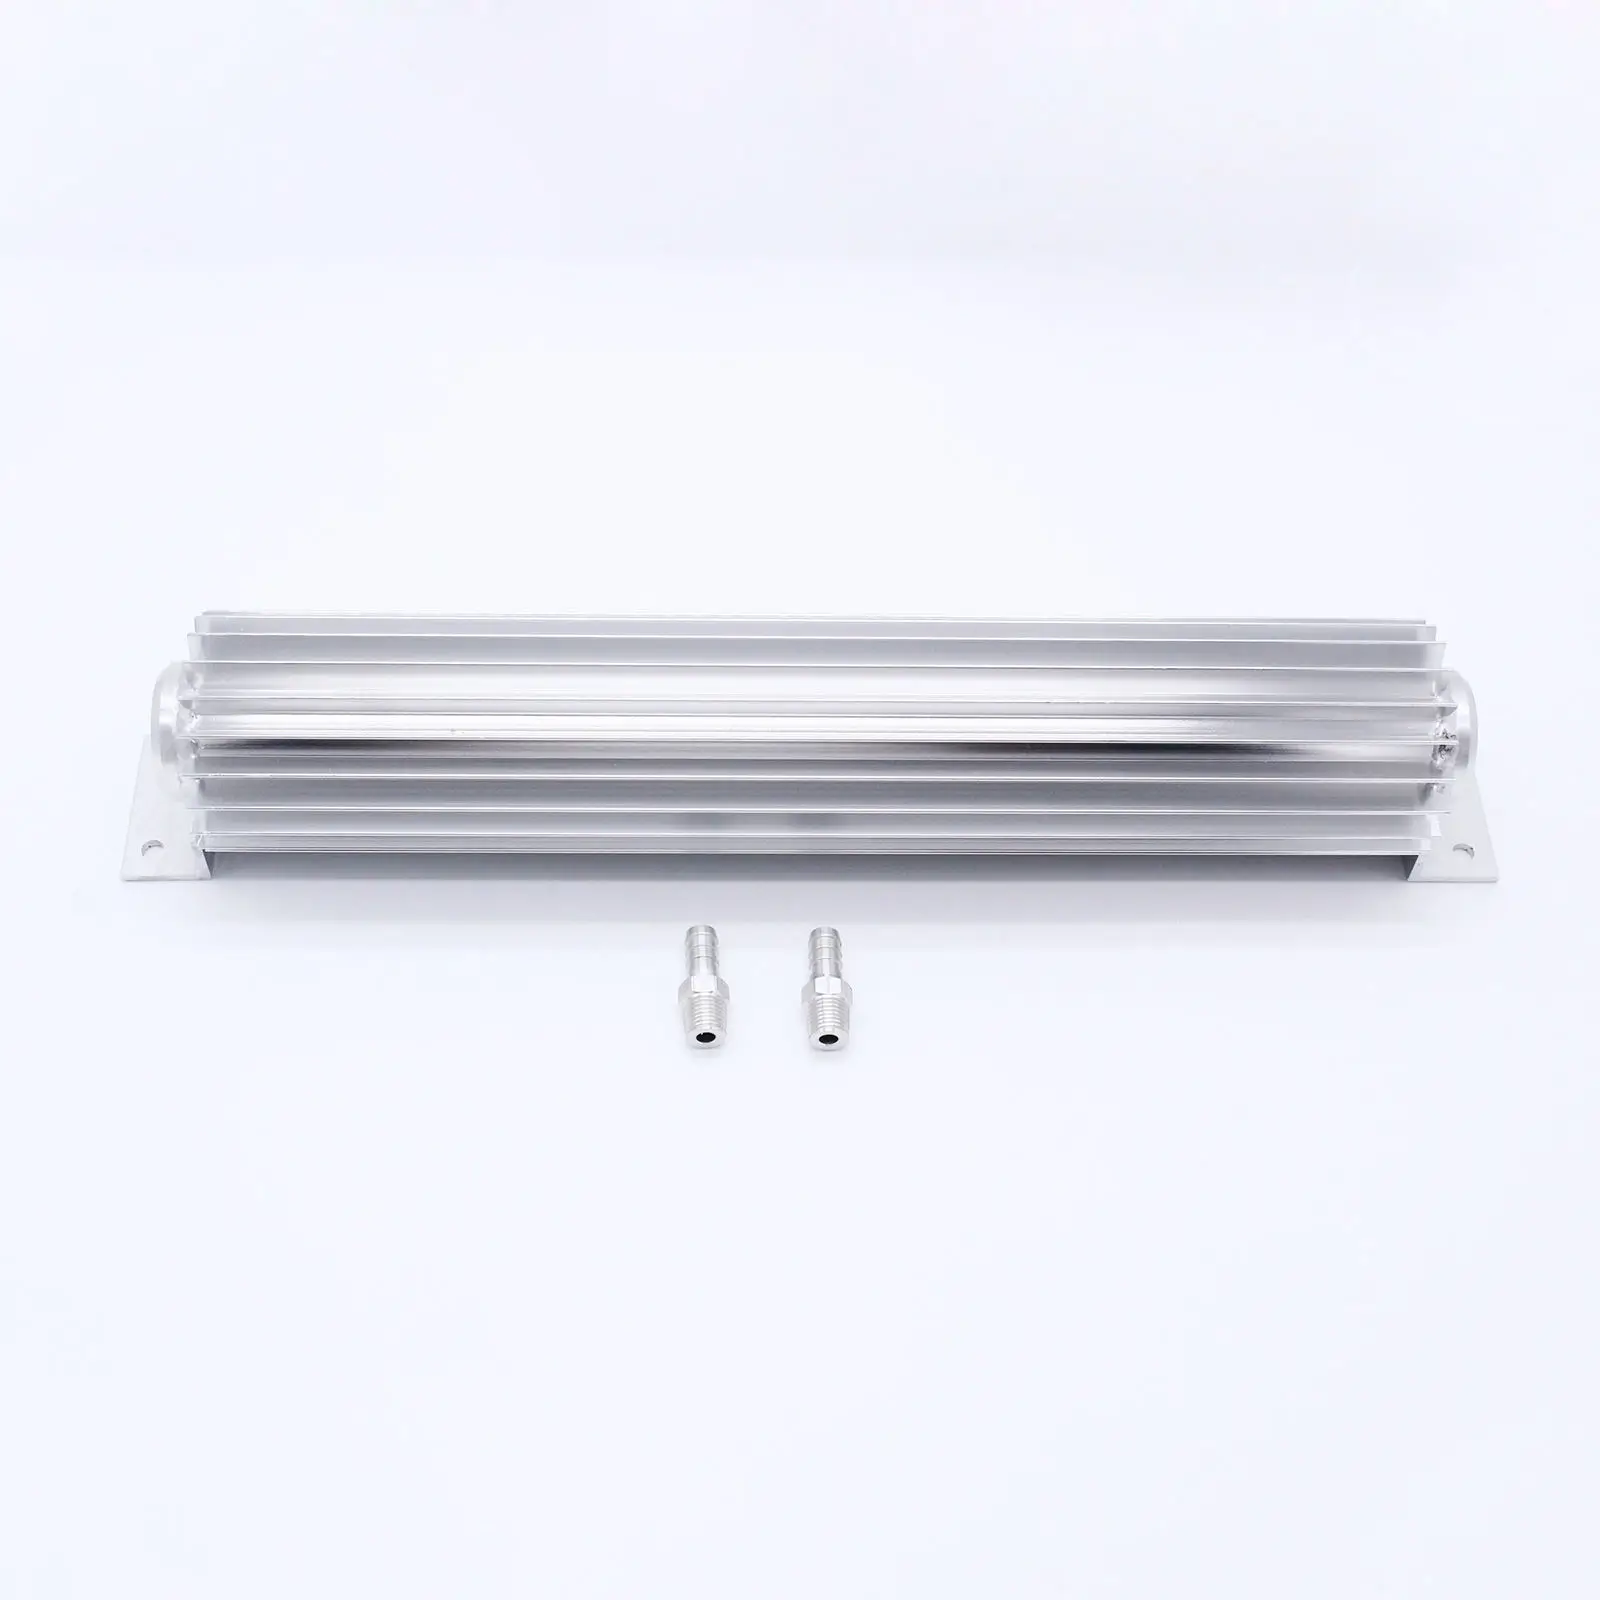 15inch Transmission Oil Cooler Aluminum Replacement Universal Moulding 1Set Dual Pass Vehicle Parts Finned Supplies